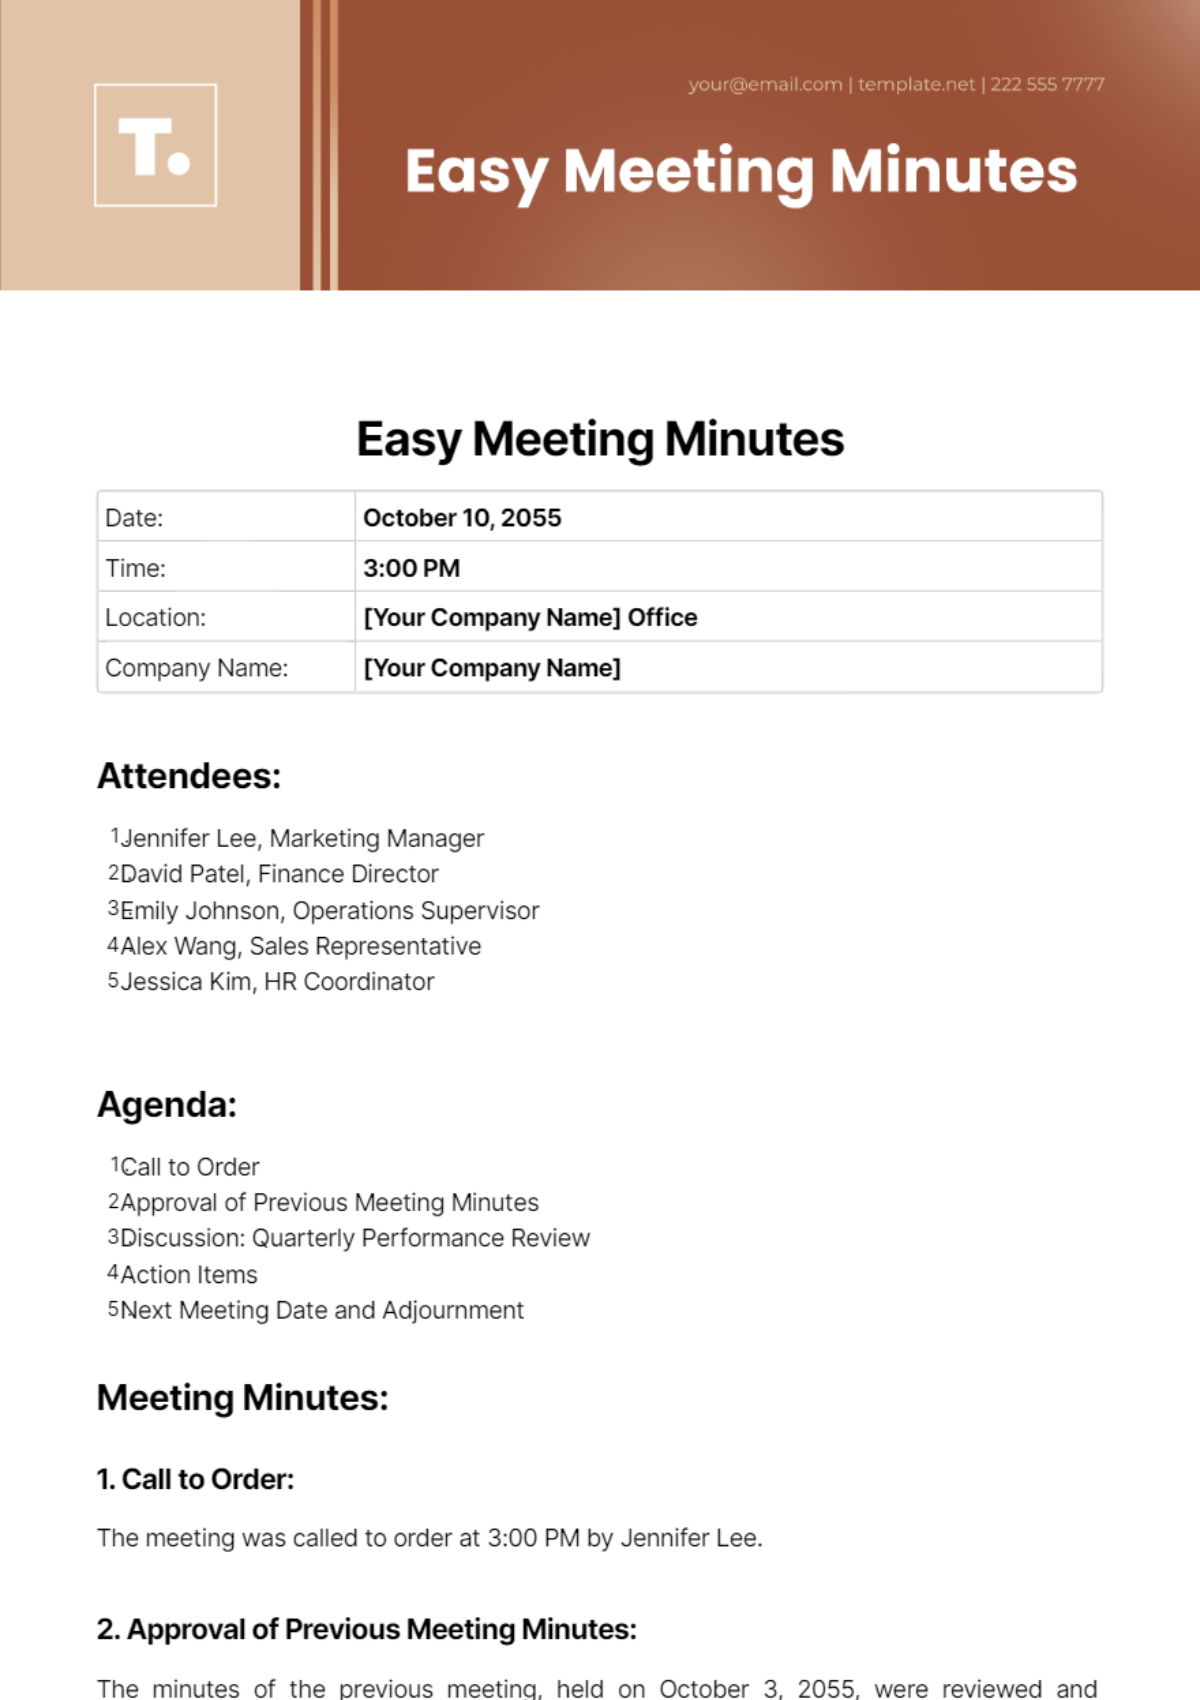 Easy Meeting Minutes Template